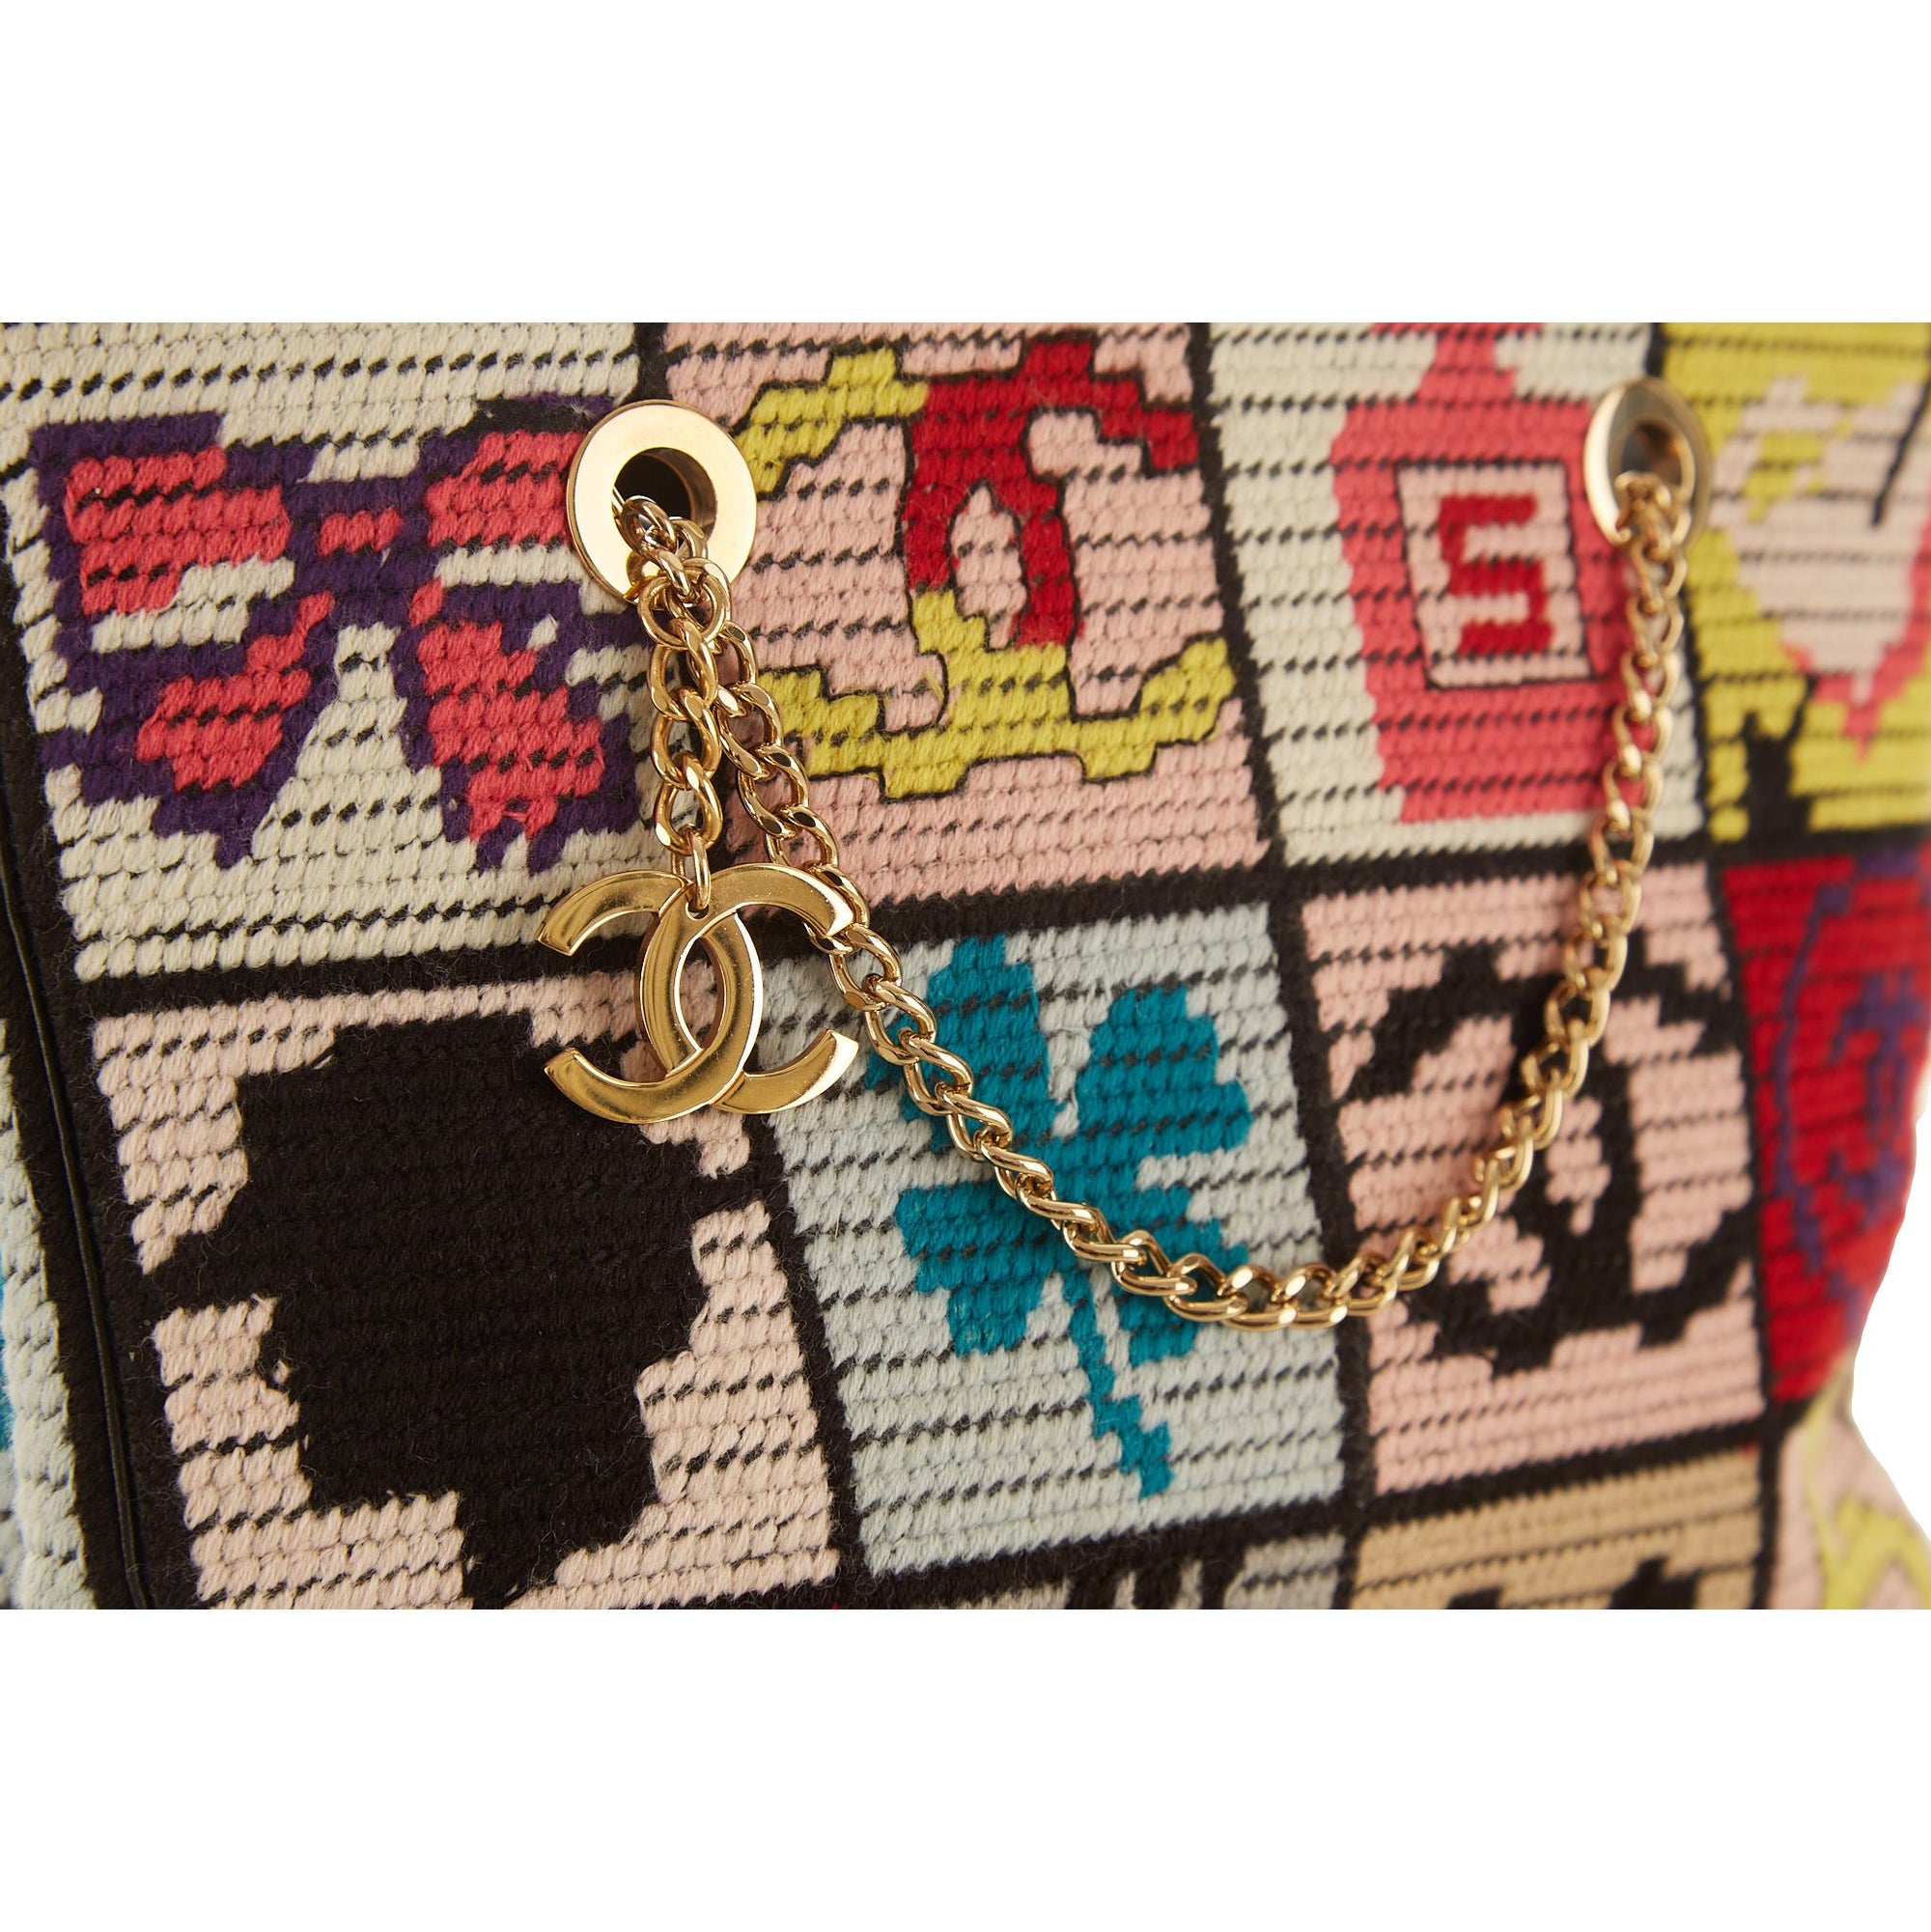 Past auction: Chanel needlepoint chain handle purse contemporary